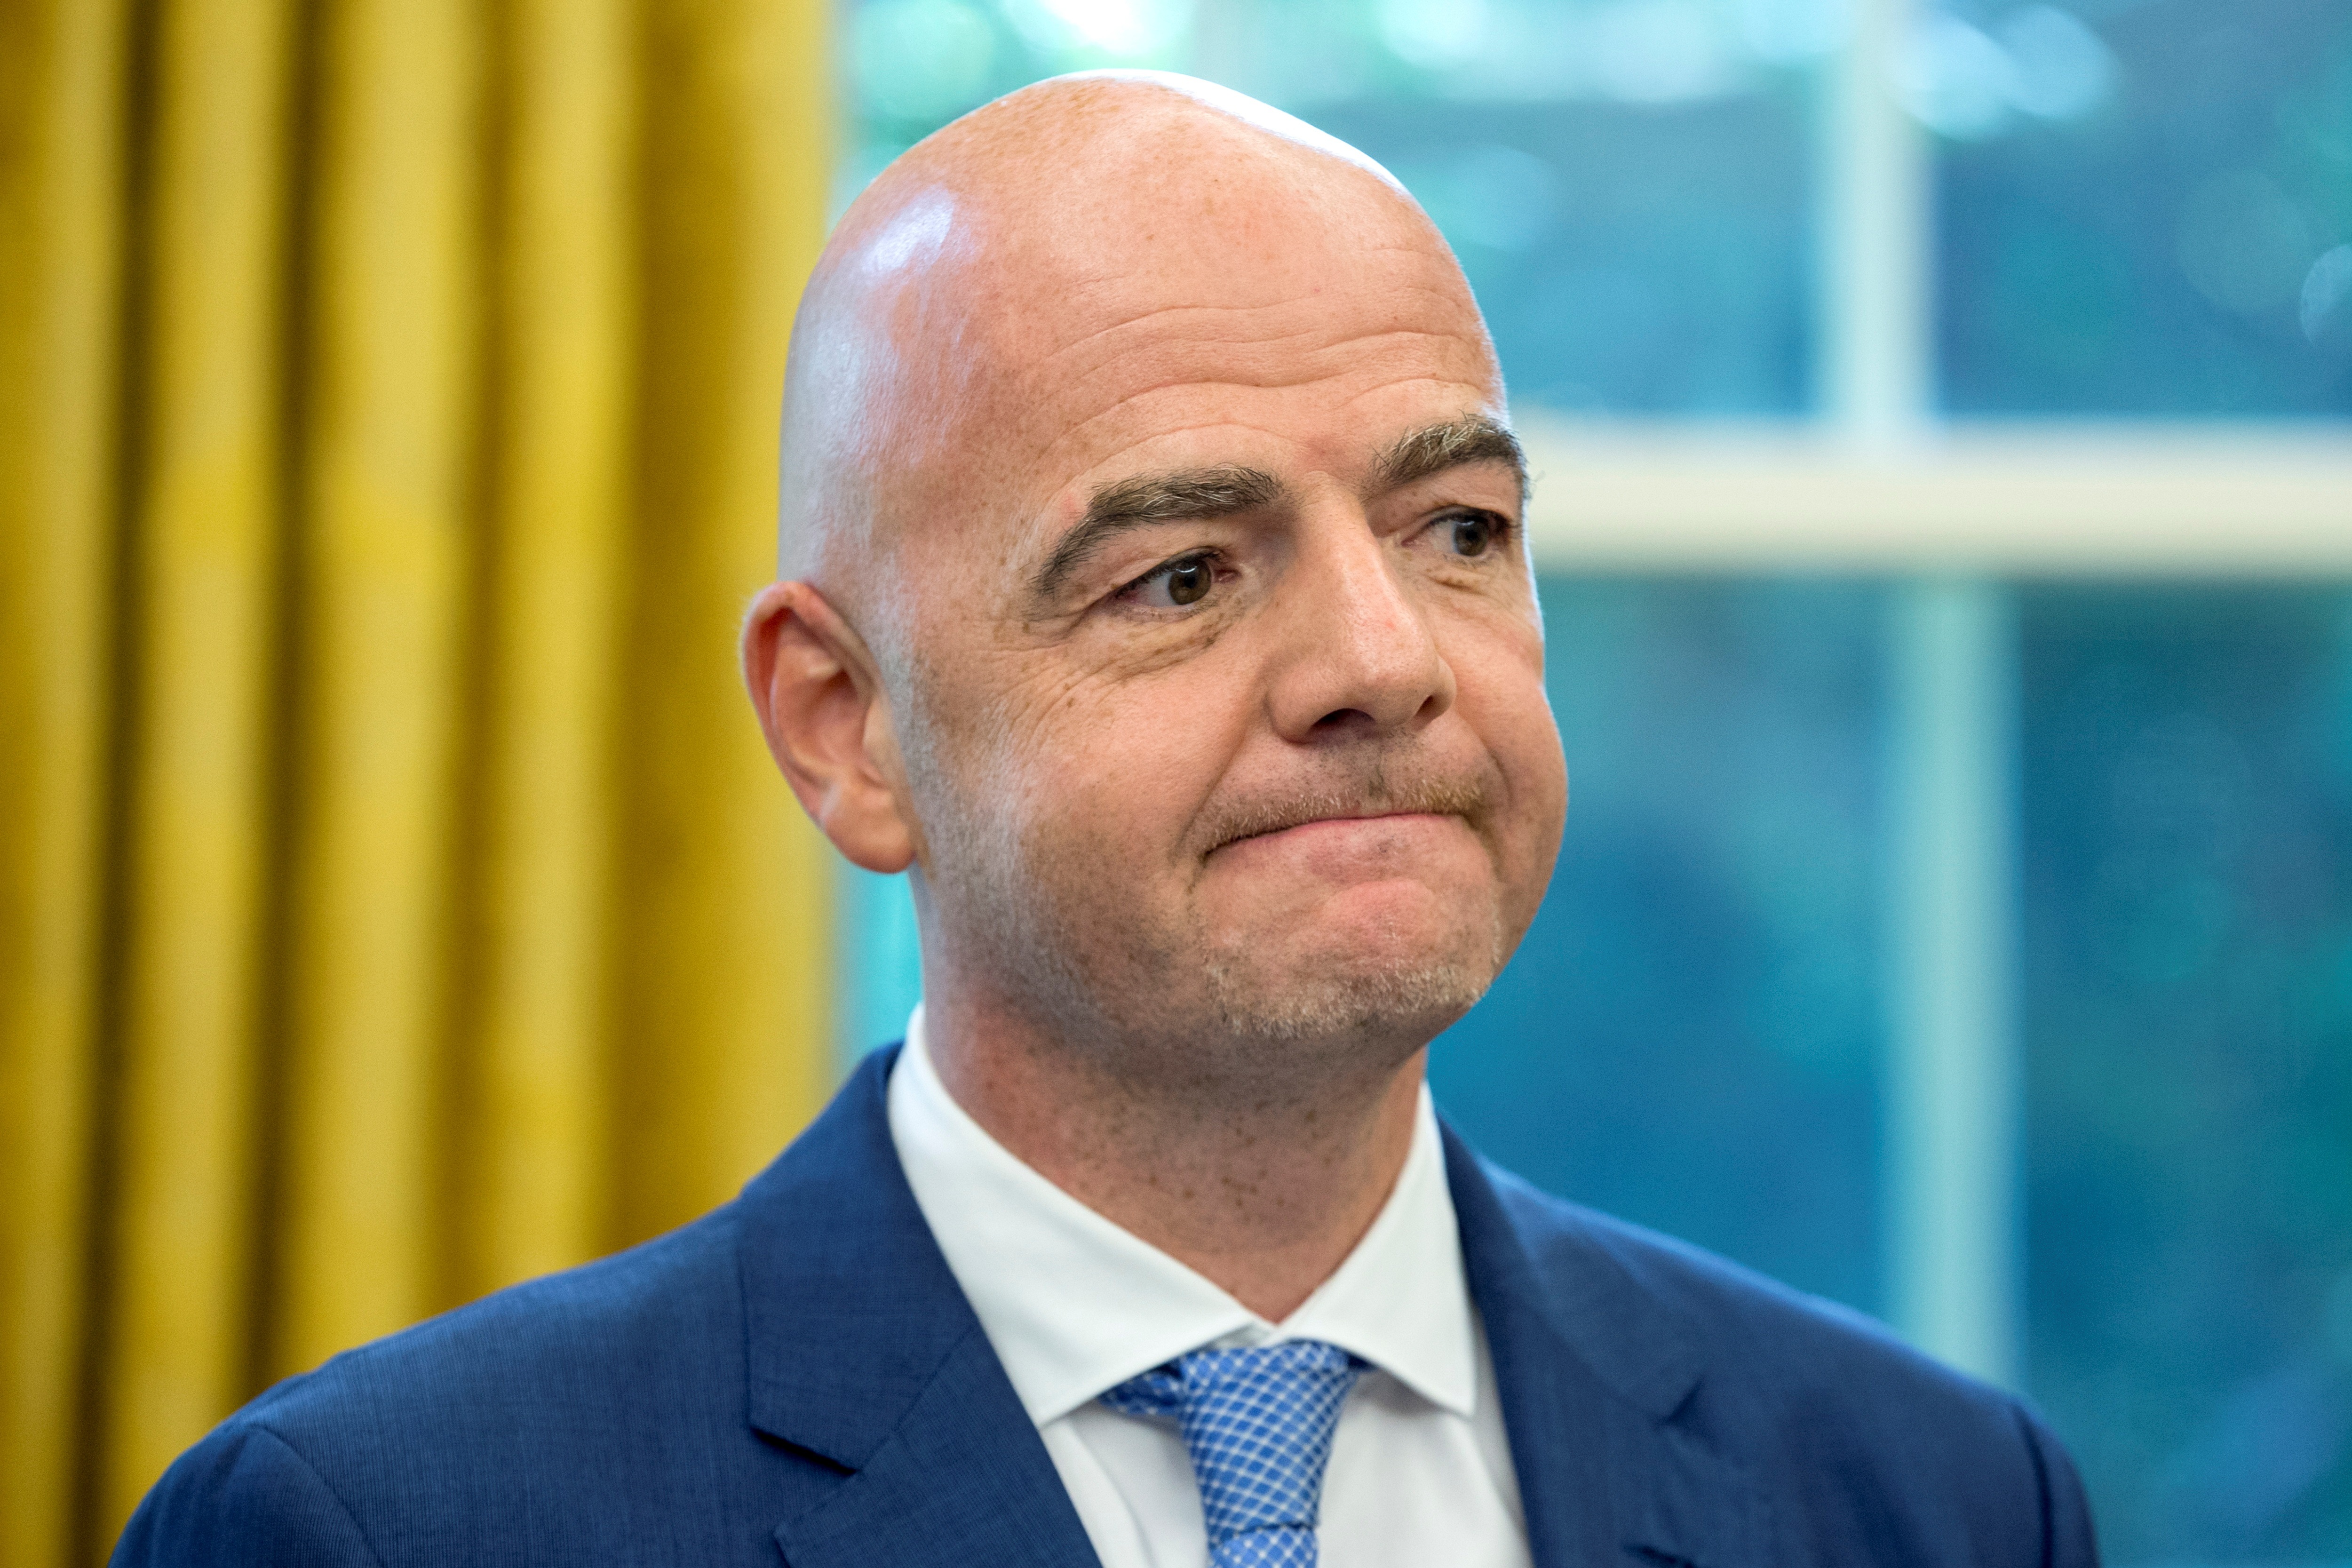 Gianni Infantino: Ridiculous remarks, a criminal probe, and a billionaire’s life paid by FIFA